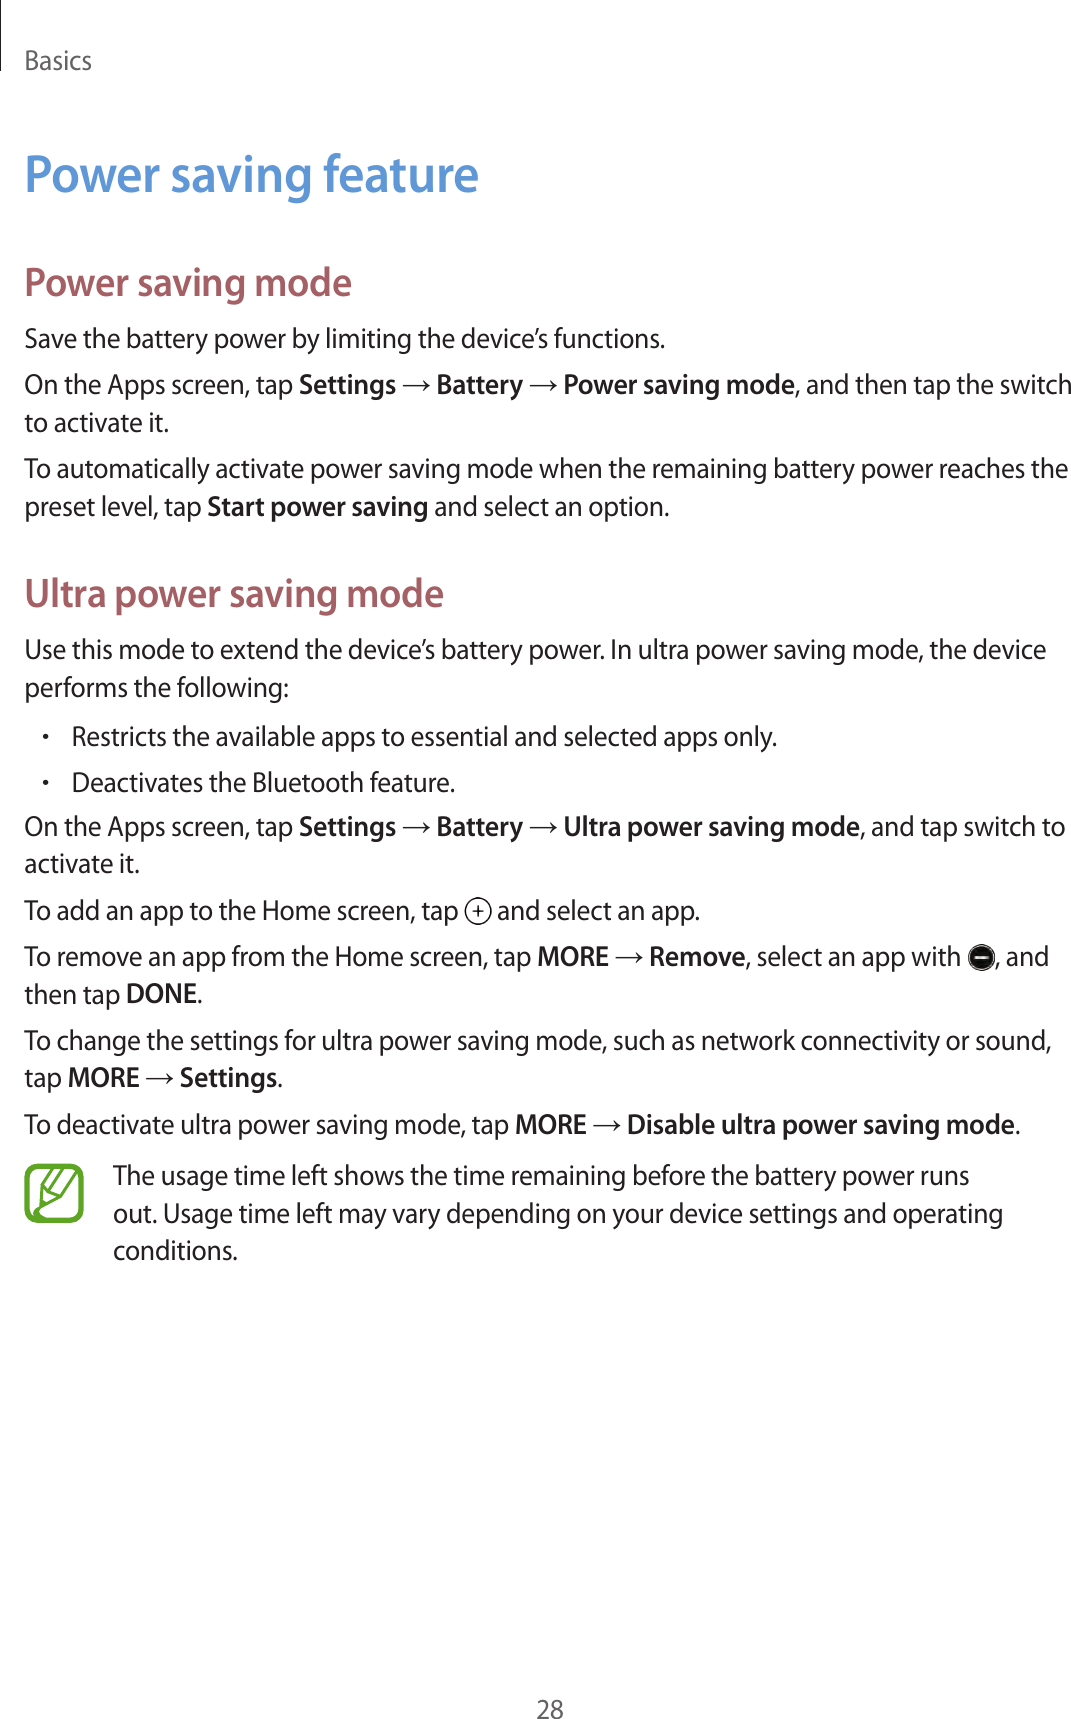 Basics28Power saving featurePower saving modeSave the battery power by limiting the device’s functions.On the Apps screen, tap Settings → Battery → Power saving mode, and then tap the switch to activate it.To automatically activate power saving mode when the remaining battery power reaches the preset level, tap Start power saving and select an option.Ultra power saving modeUse this mode to extend the device’s battery power. In ultra power saving mode, the device performs the following:•Restricts the available apps to essential and selected apps only.•Deactivates the Bluetooth feature.On the Apps screen, tap Settings → Battery → Ultra power saving mode, and tap switch to activate it.To add an app to the Home screen, tap   and select an app.To remove an app from the Home screen, tap MORE → Remove, select an app with  , and then tap DONE.To change the settings for ultra power saving mode, such as network connectivity or sound, tap MORE → Settings.To deactivate ultra power saving mode, tap MORE → Disable ultra power saving mode.The usage time left shows the time remaining before the battery power runs out. Usage time left may vary depending on your device settings and operating conditions.